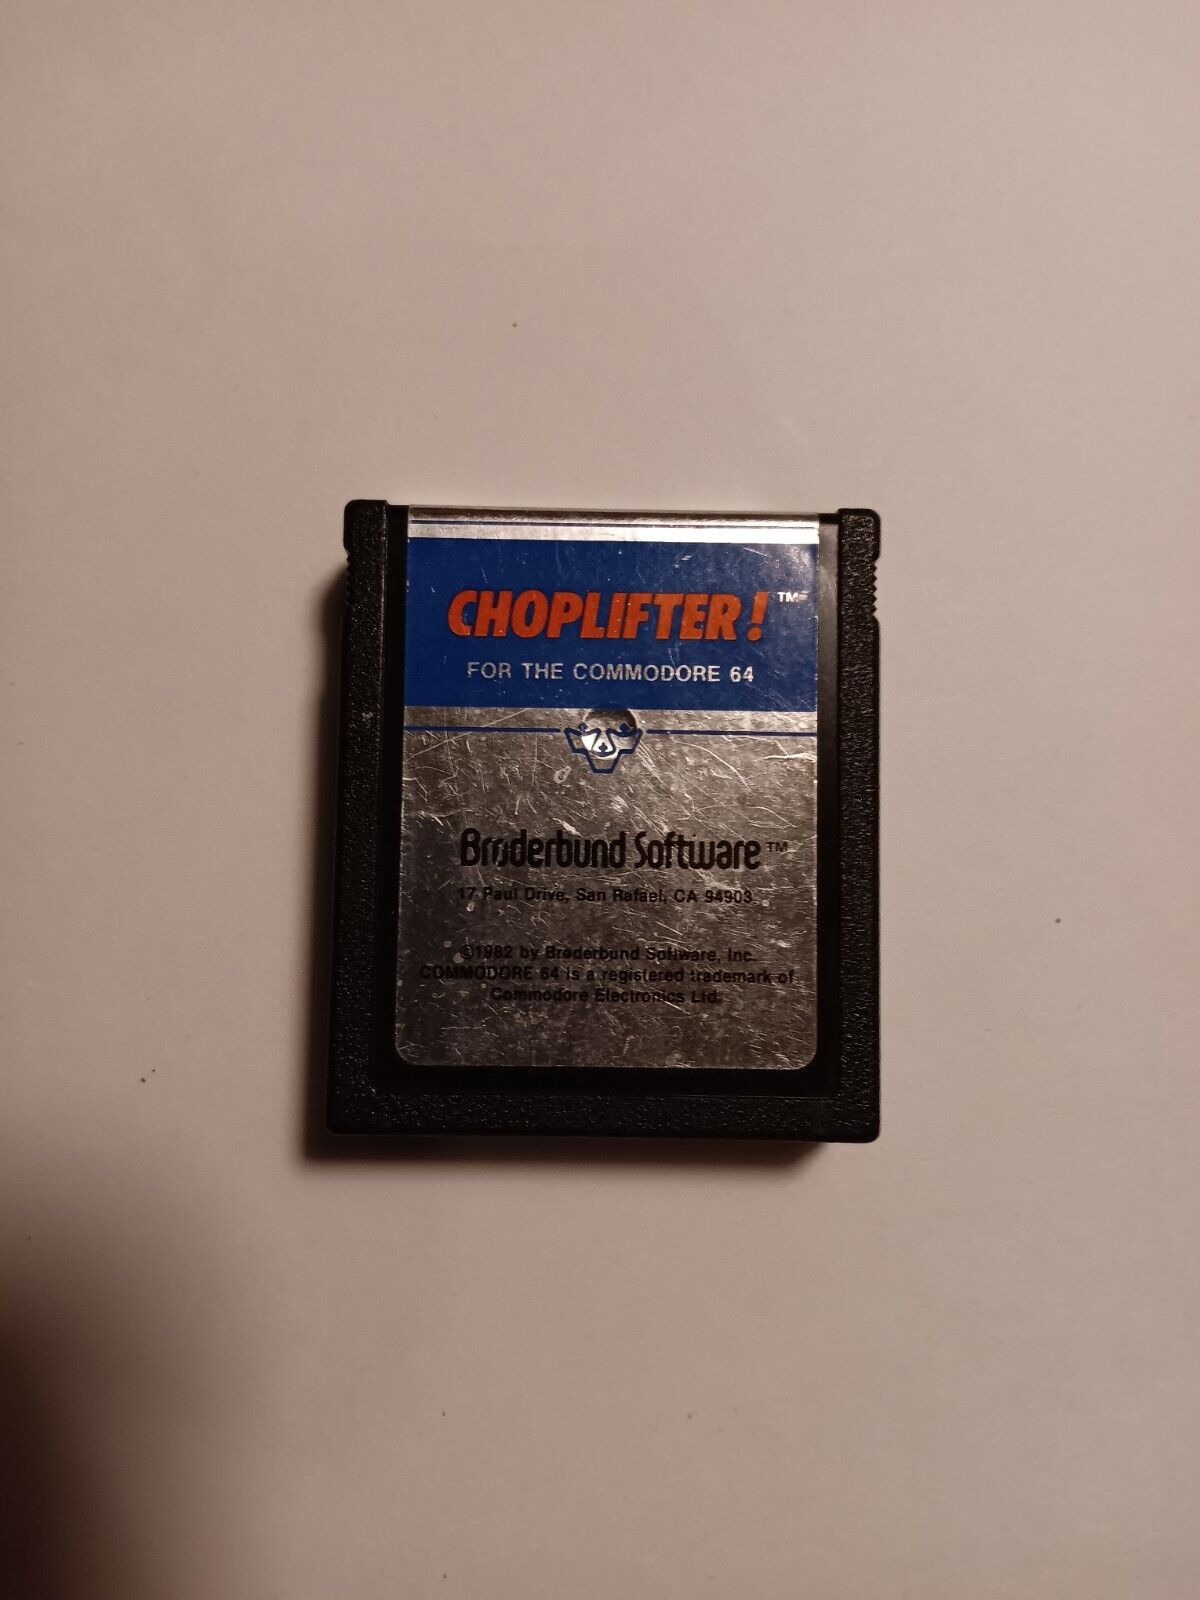 VTG Commodore 64 Choplifter Computer Game Cartridge - Tested/Works